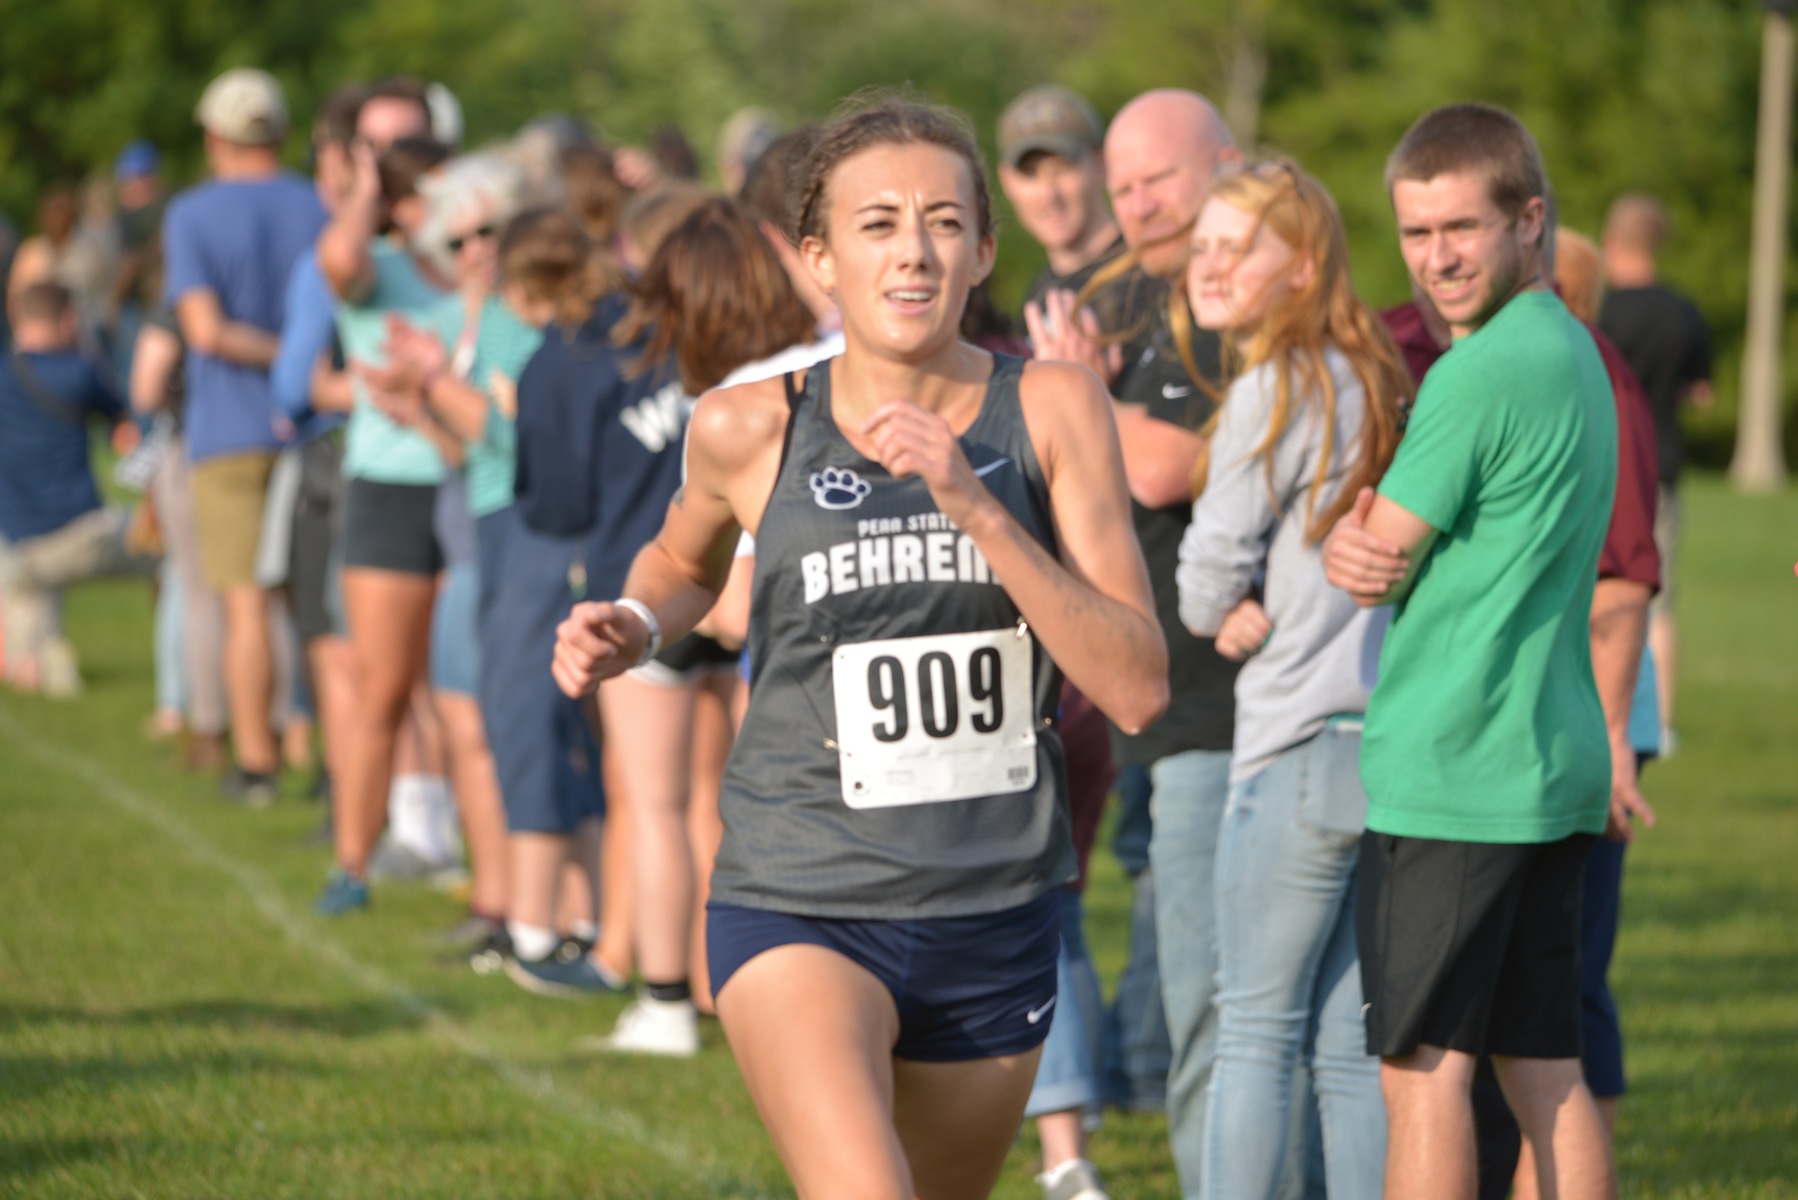 Women's Cross Country Finishes First at Behrend Invite